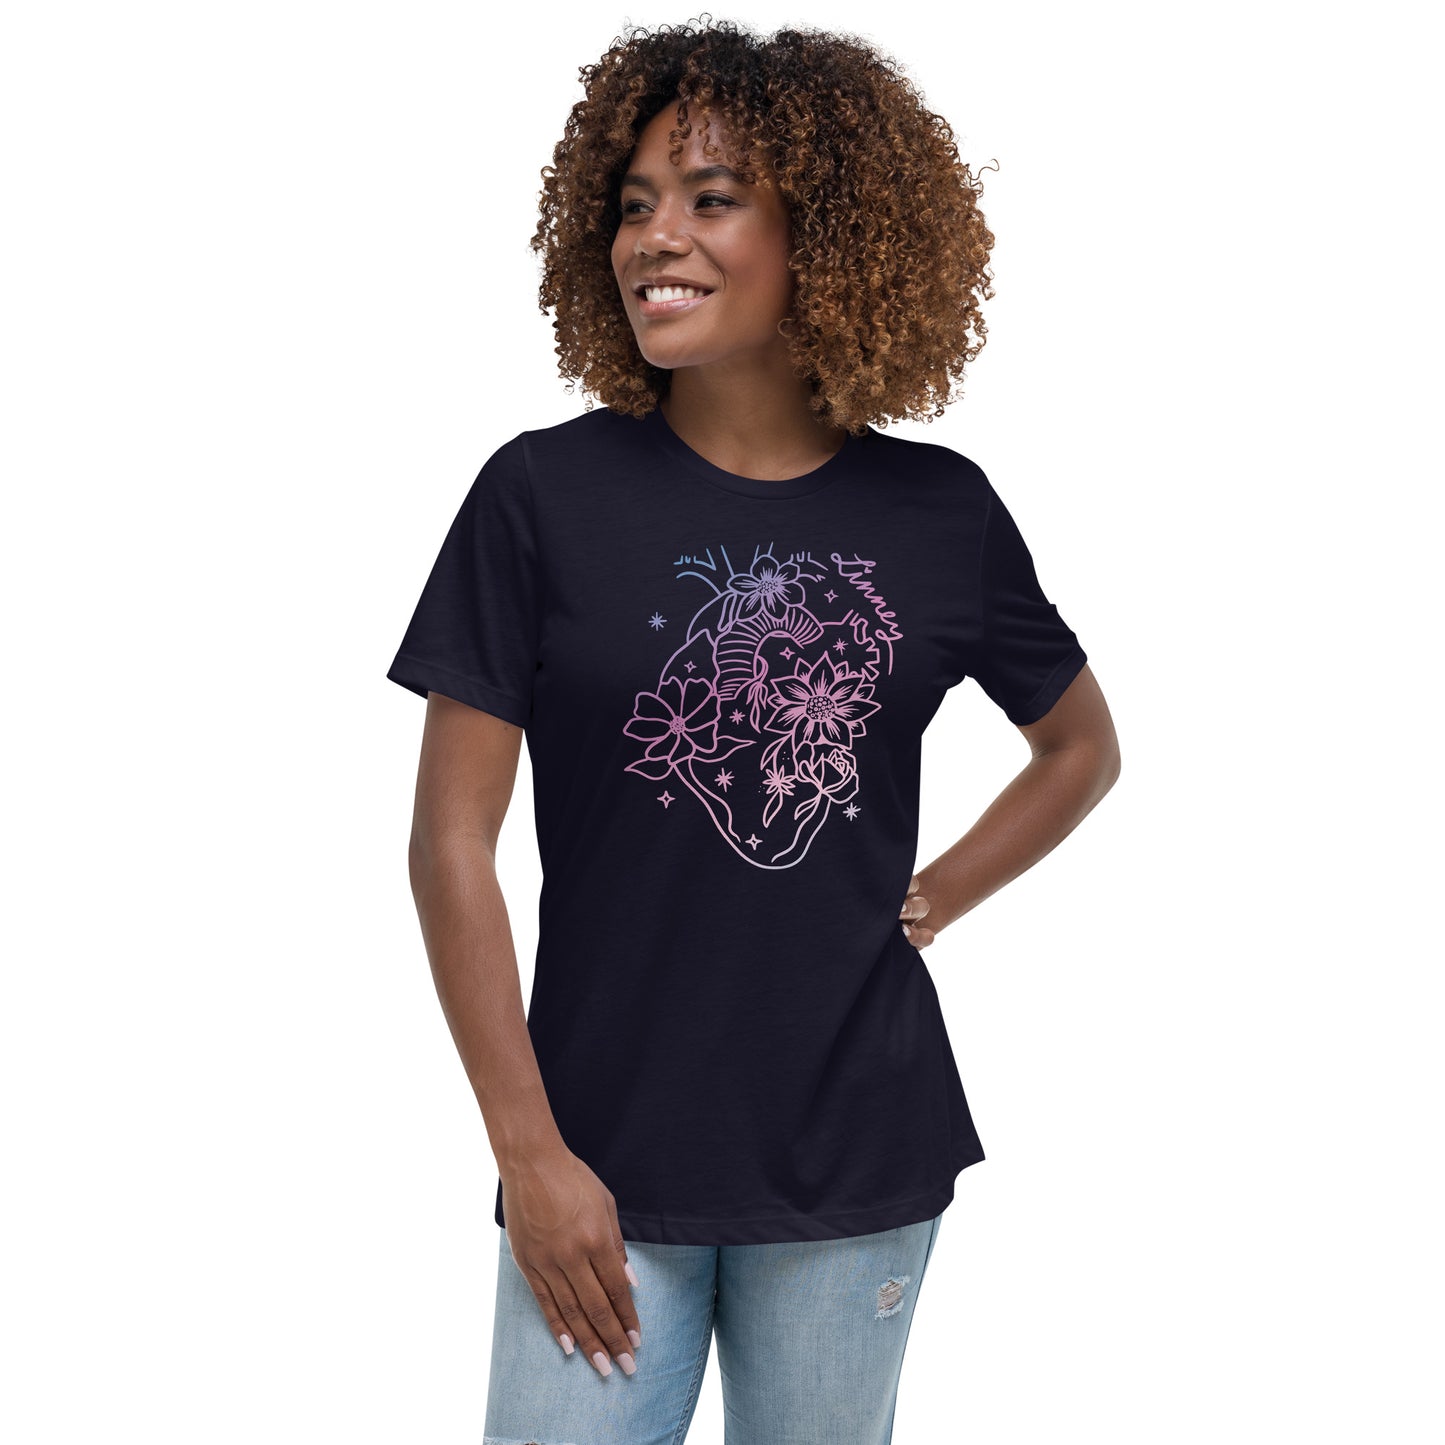 Flowers Grow From Inside Out (Gradient) - Women's Relaxed Tee